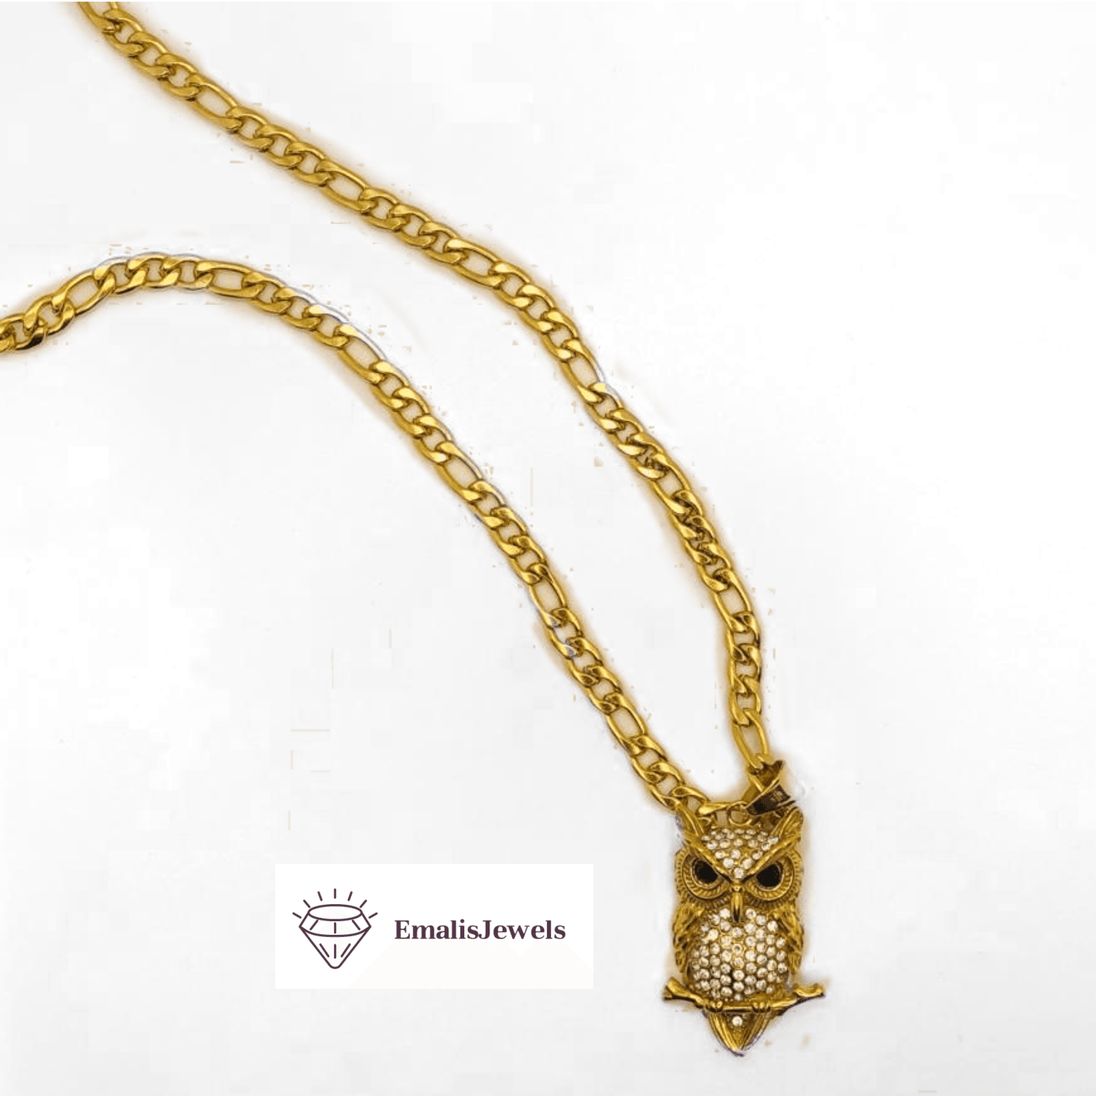 Stainless Steel Chain Necklace and Stainless Steel Gold Overlay Owl Pendant - PremiumBrandGoods